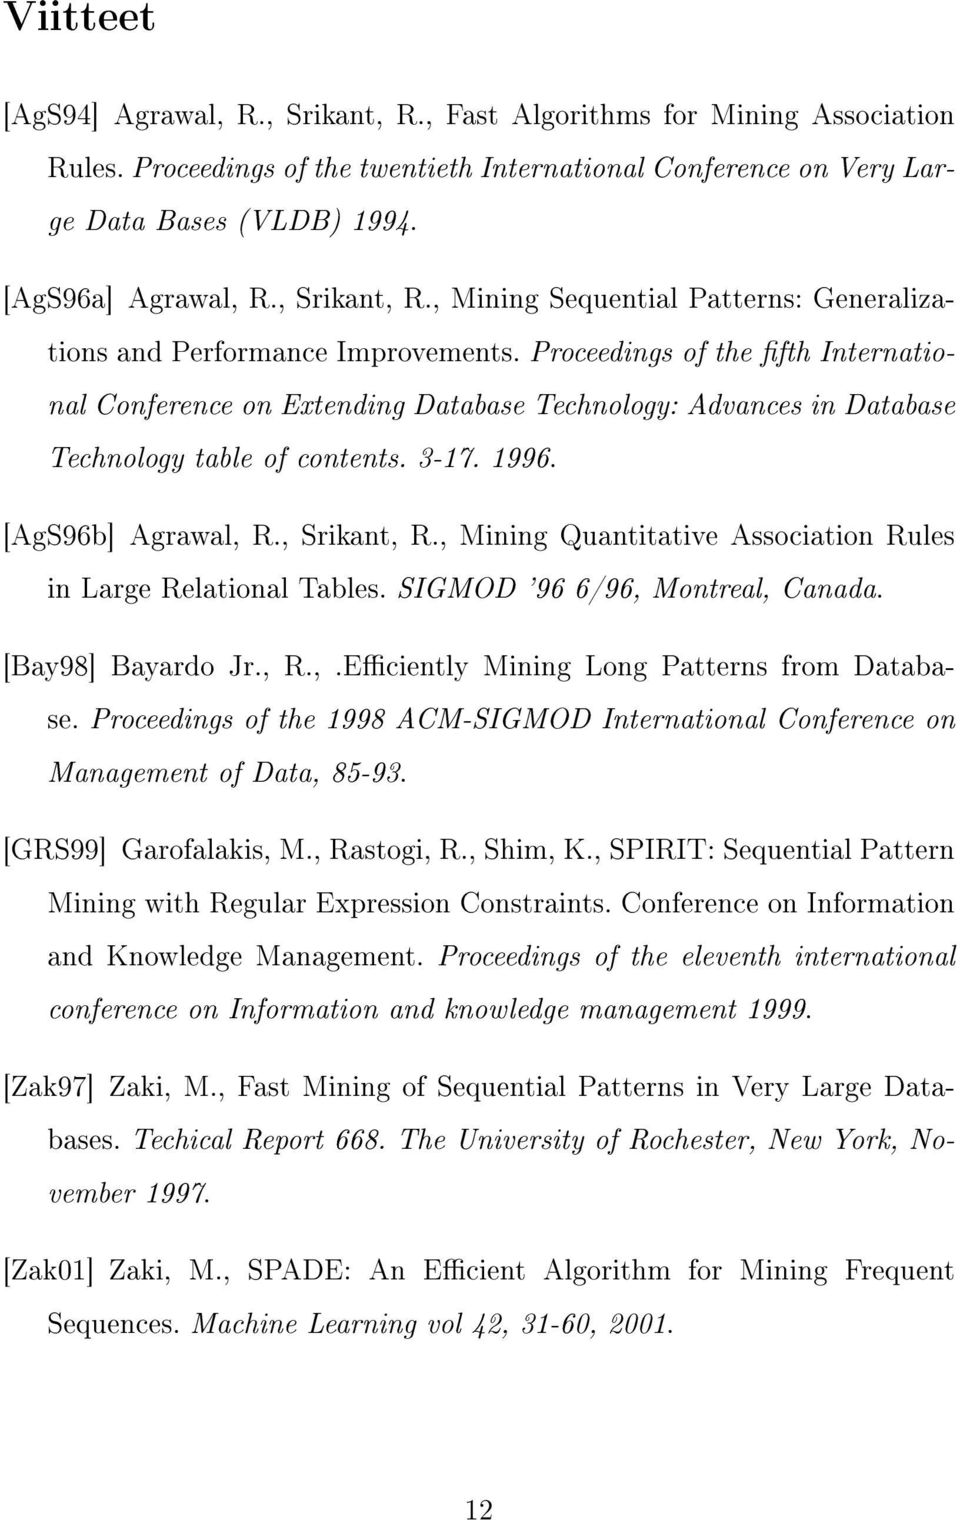 Proceedings of the fth International Conference on Extending Database Technology: Advances in Database Technology table of contents. 3-17. 1996. [AgS96b] Agrawal, R., Srikant, R.